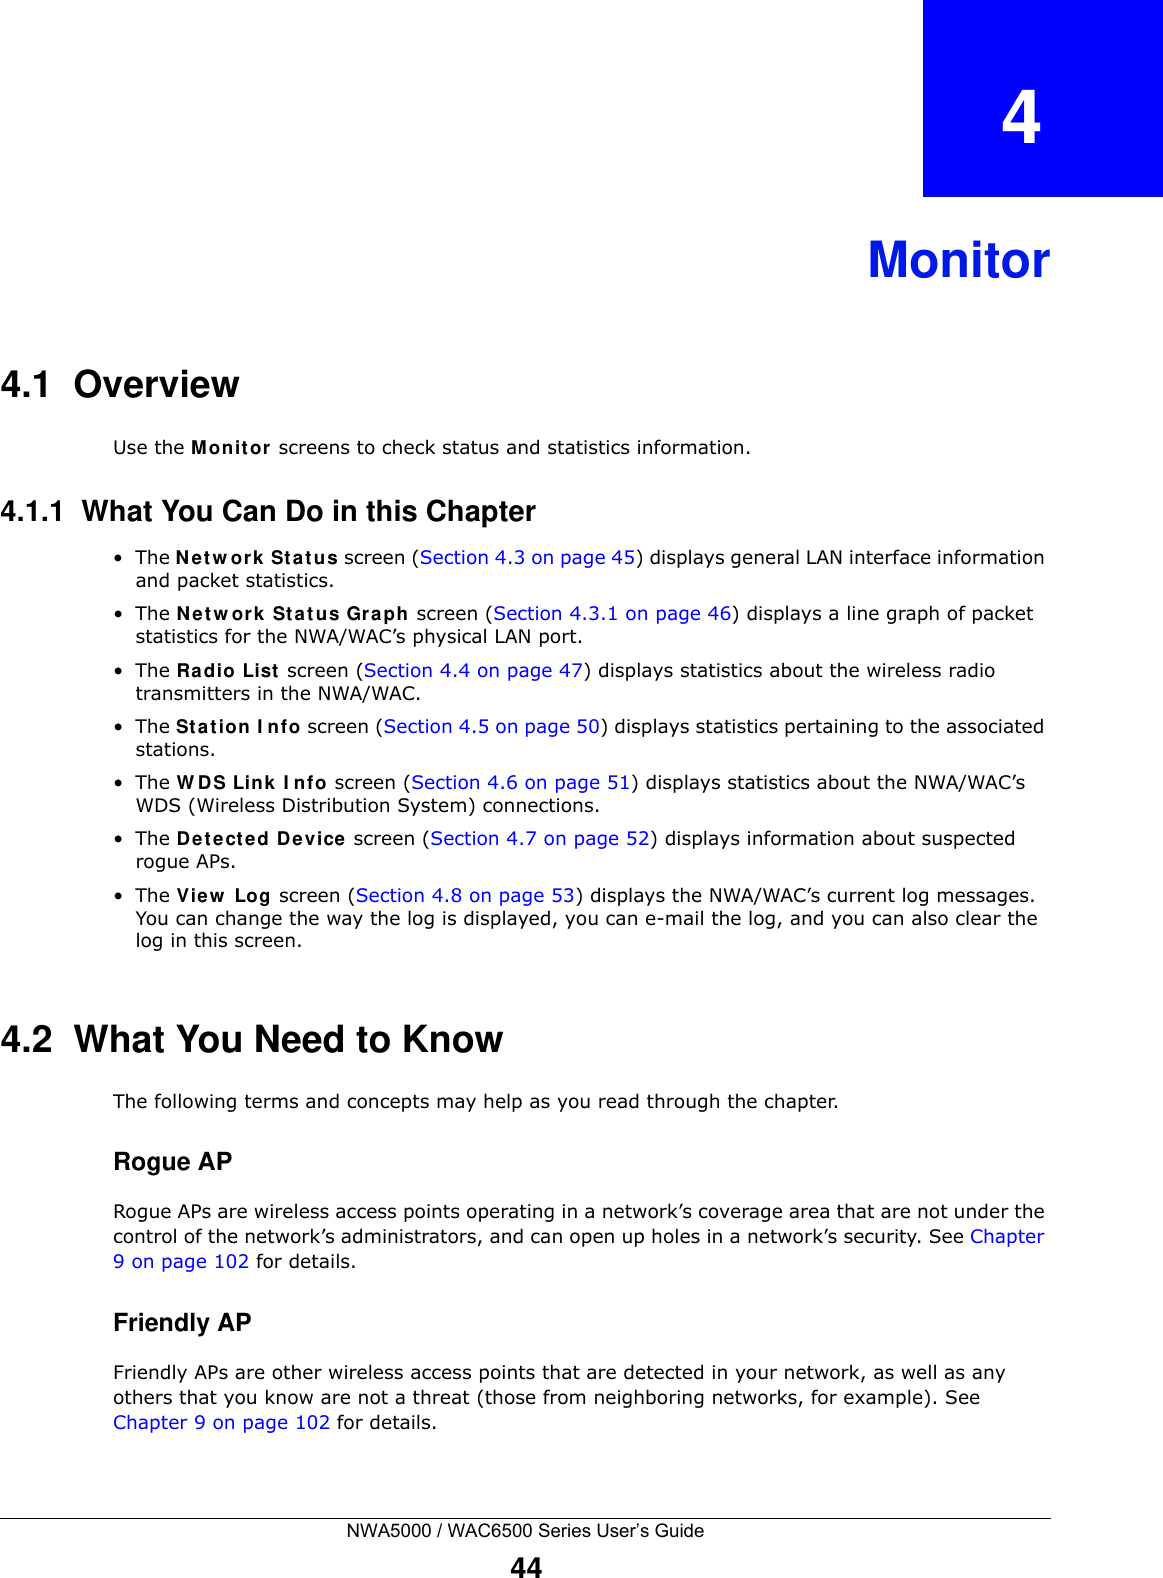 NWA5000 / WAC6500 Series User’s Guide44CHAPTER   4Monitor4.1  OverviewUse the M onit or screens to check status and statistics information.4.1.1  What You Can Do in this Chapter•The N et w ork  St a tus screen (Section 4.3 on page 45) displays general LAN interface information and packet statistics. •The N et w ork  St a tus Gr aph screen (Section 4.3.1 on page 46) displays a line graph of packet statistics for the NWA/WAC’s physical LAN port. •The Ra dio List  screen (Section 4.4 on page 47) displays statistics about the wireless radio transmitters in the NWA/WAC.•The St a tion  I n fo screen (Section 4.5 on page 50) displays statistics pertaining to the associated stations.•The W D S Link I nfo screen (Section 4.6 on page 51) displays statistics about the NWA/WAC’s WDS (Wireless Distribution System) connections.•The De te ct e d De vice screen (Section 4.7 on page 52) displays information about suspected rogue APs.•The View  Log screen (Section 4.8 on page 53) displays the NWA/WAC’s current log messages. You can change the way the log is displayed, you can e-mail the log, and you can also clear the log in this screen.4.2  What You Need to KnowThe following terms and concepts may help as you read through the chapter.Rogue APRogue APs are wireless access points operating in a network’s coverage area that are not under the control of the network’s administrators, and can open up holes in a network’s security. See Chapter 9 on page 102 for details.Friendly APFriendly APs are other wireless access points that are detected in your network, as well as any others that you know are not a threat (those from neighboring networks, for example). See Chapter 9 on page 102 for details.